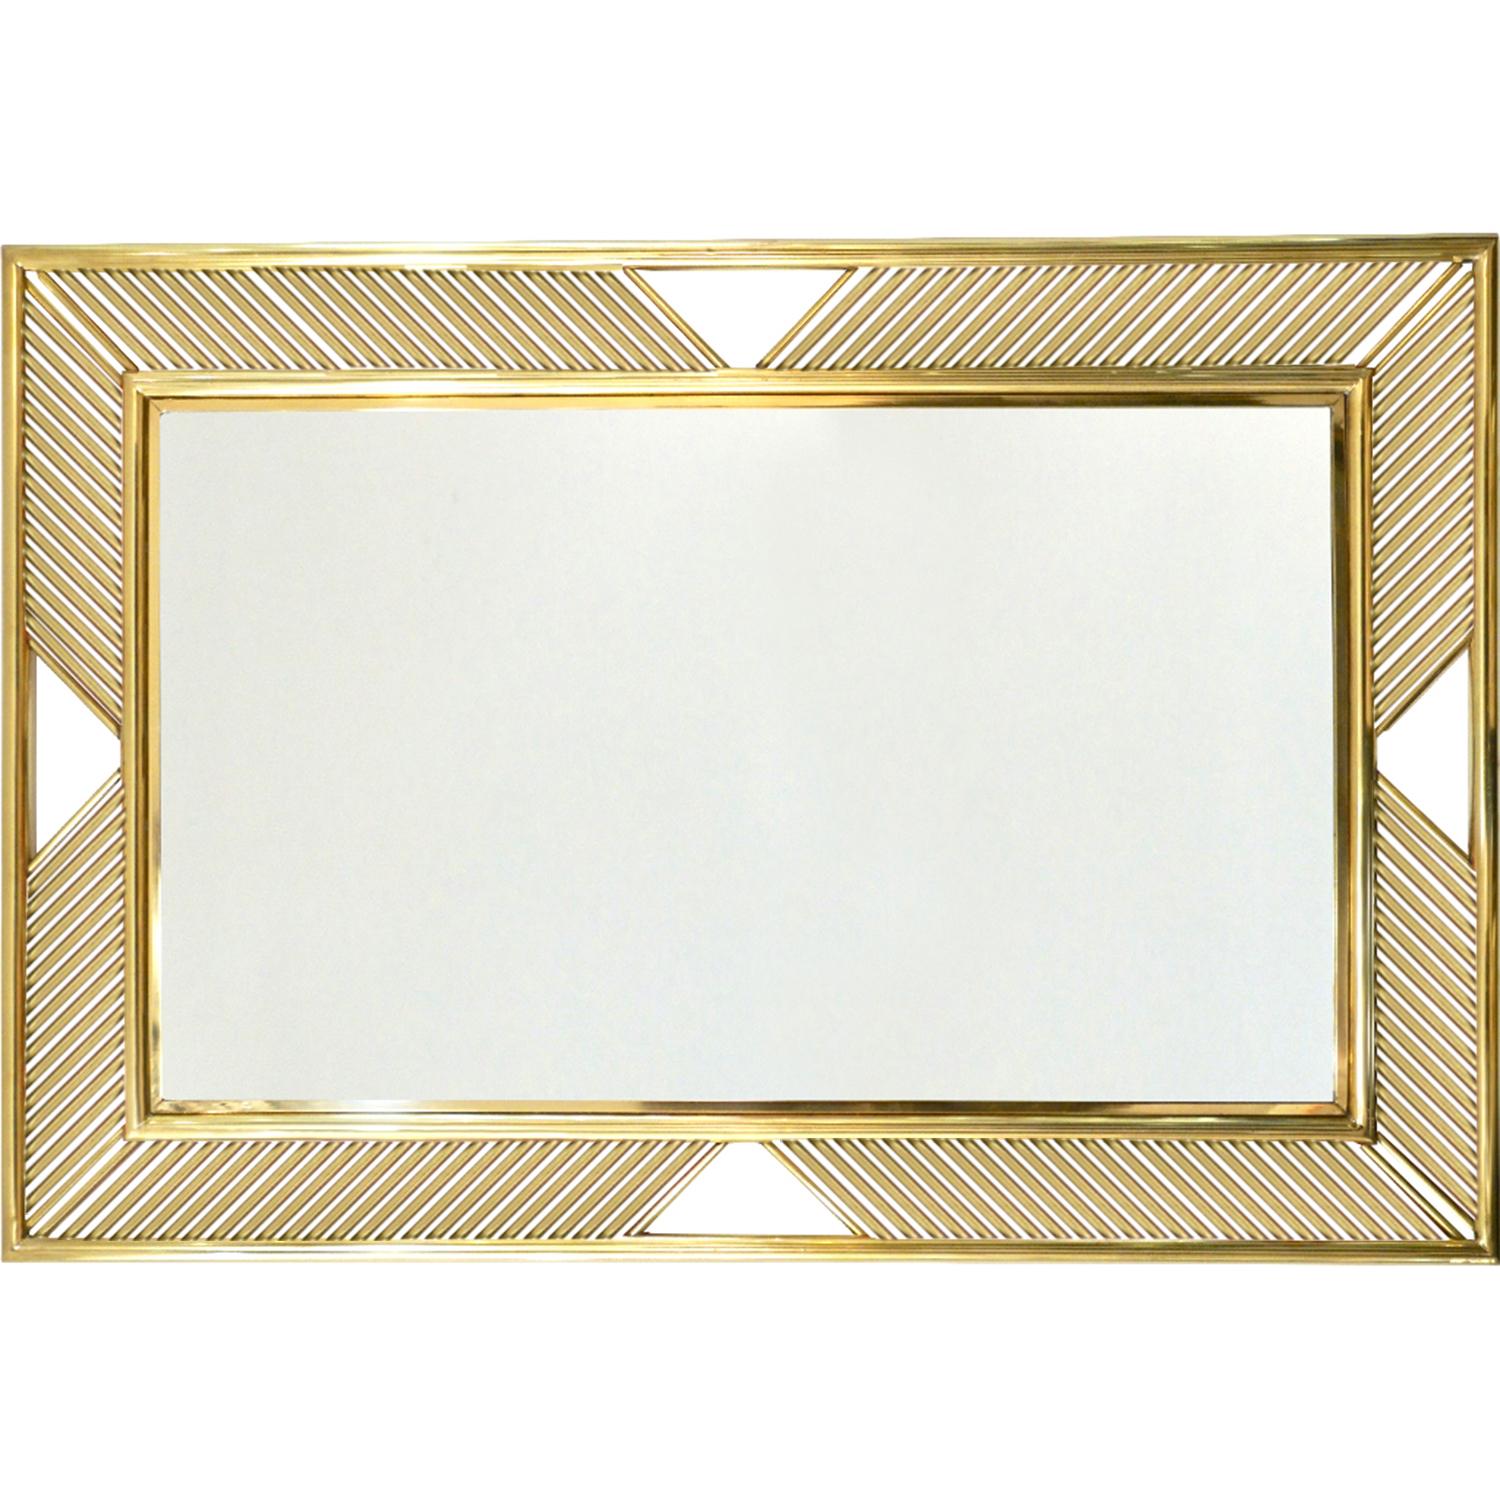 Airy minimal design mirror, entirely handcrafted in Italy, with a contemporary modern double brass frame adorned with elegant gold brass baguettes in a lattice like organic decor. The craftsmanship is of high quality with attention to details like